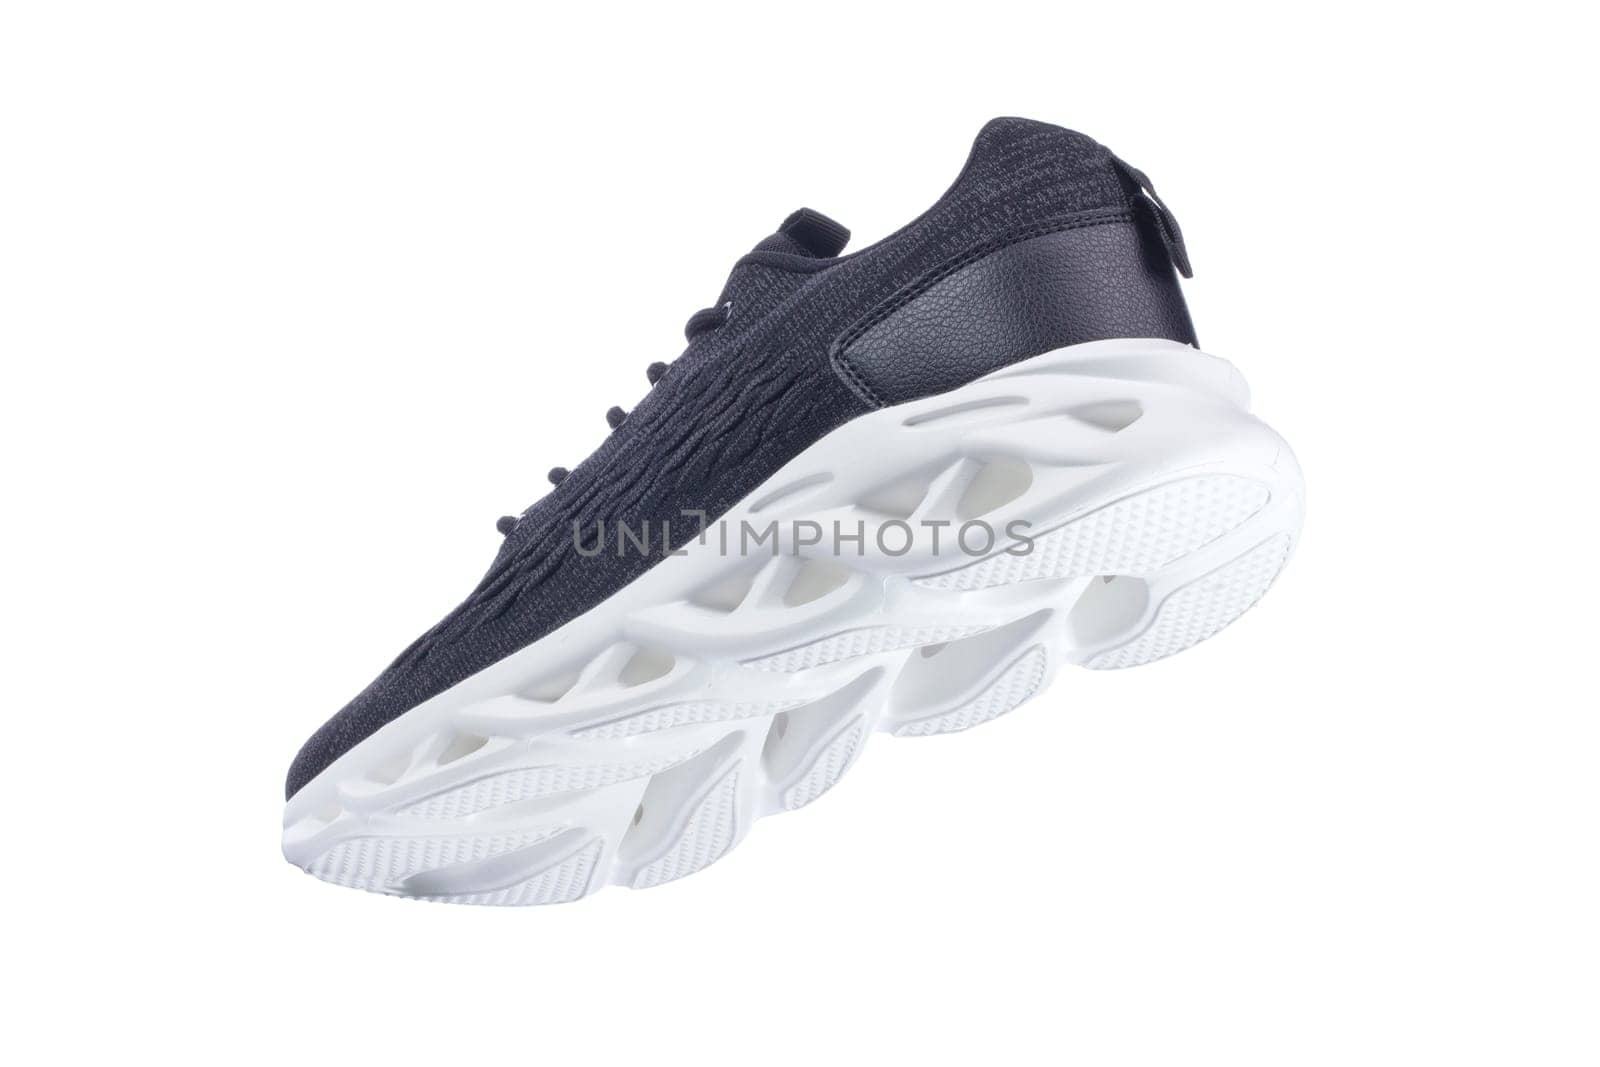 Black sneaker made of fabric with a white sole on a white shoe. by Sviatlana